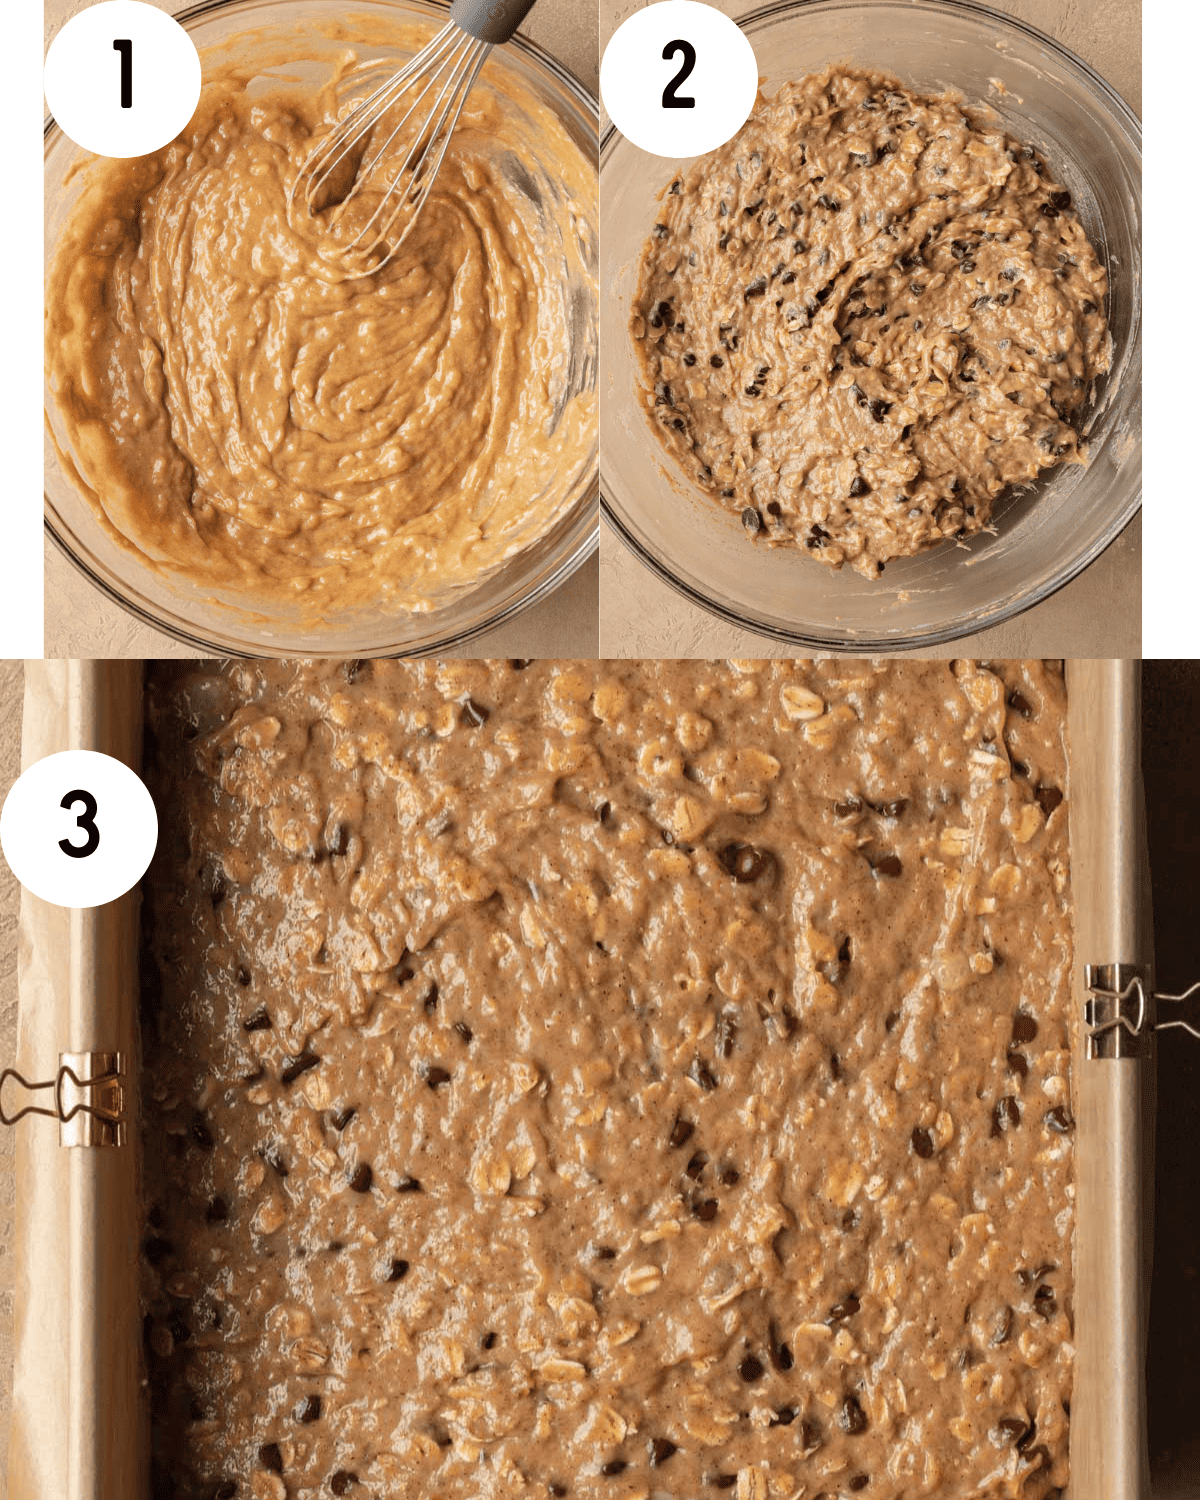 How to make Peanut Butter Banana Oatmeal bars. 1. Mix wet and dry ingredients in glass mixing bowl with a whisk. 2. Add chocolate chips into the batter and mix in glassing mixing bowl. 3. Pour batter into baking pan that is lined with parchment paper.